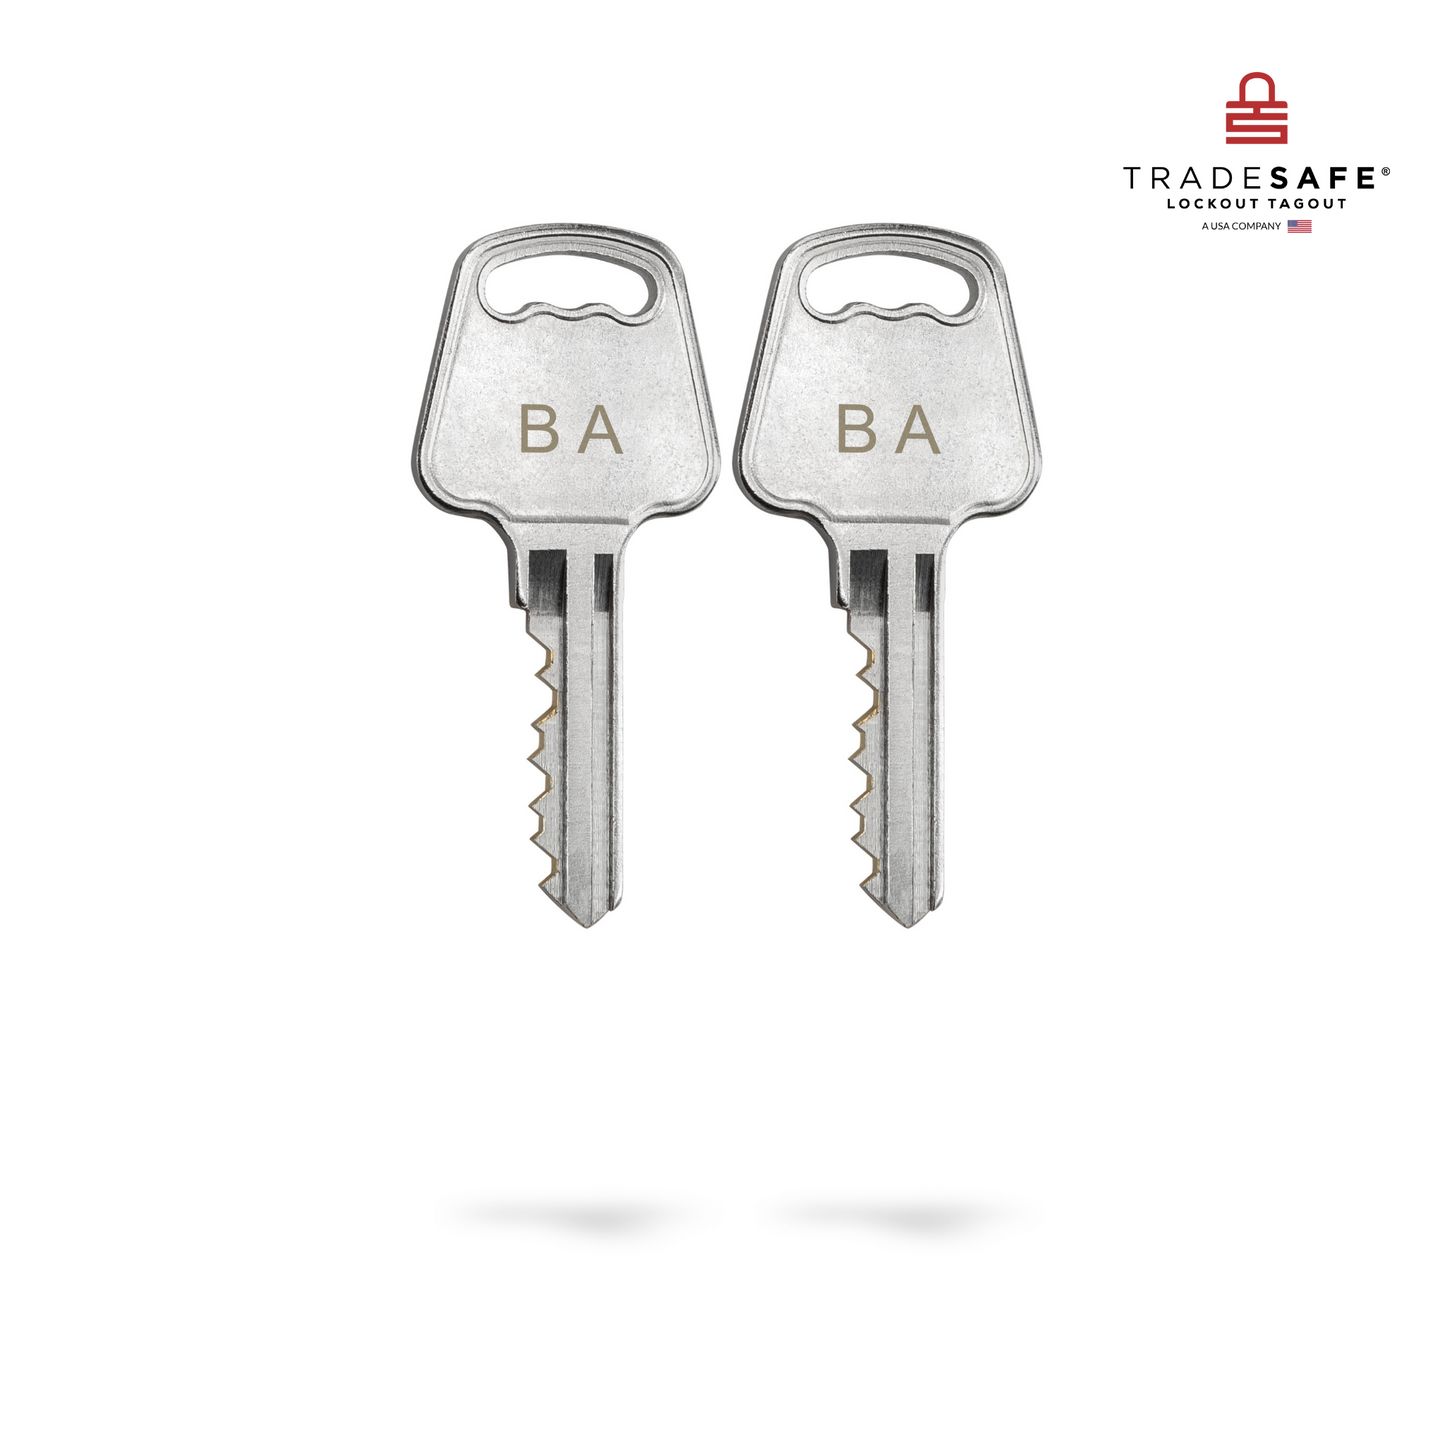 two keys, each with the letter code BA